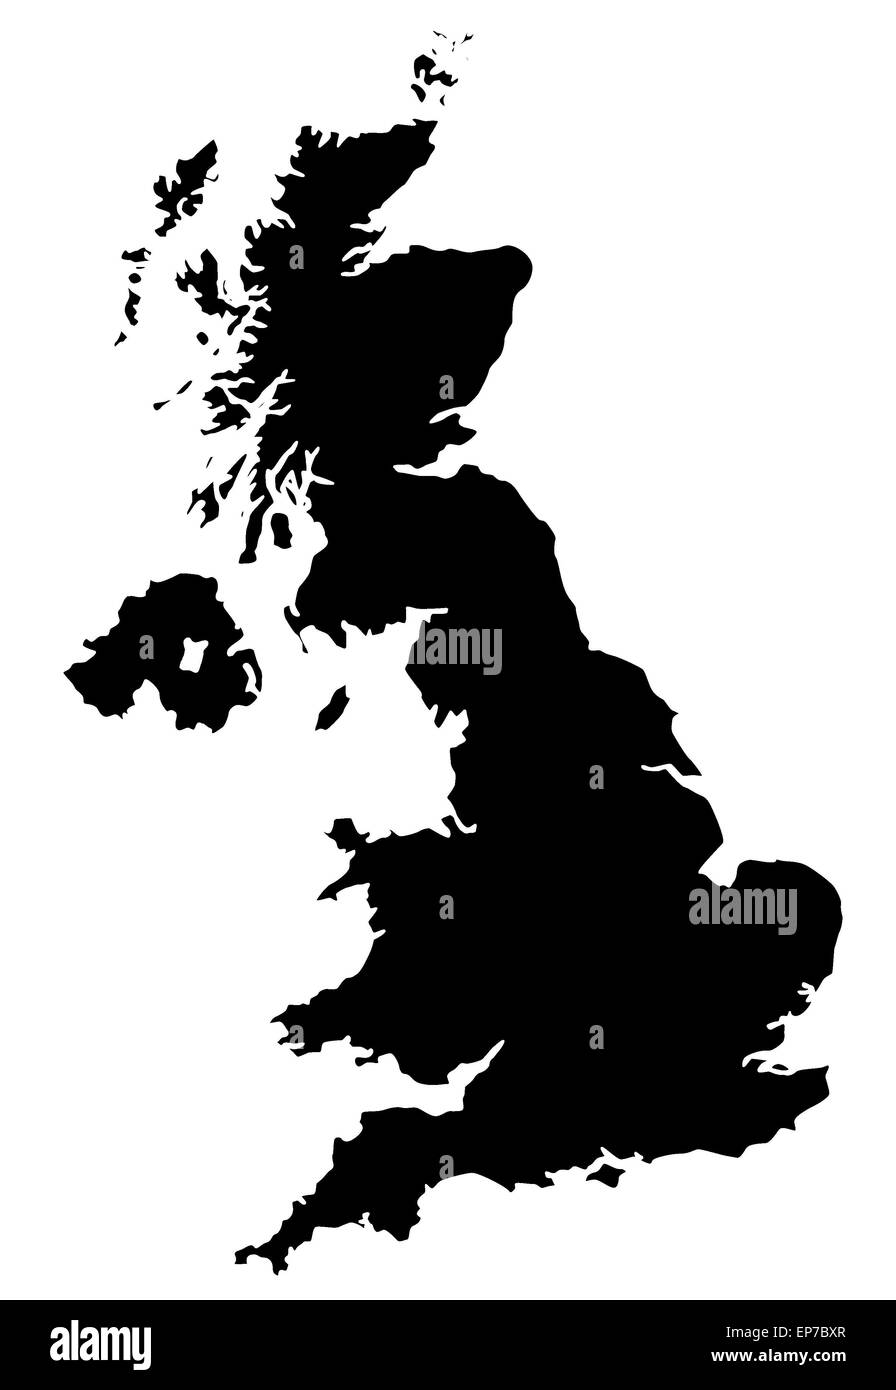 Map of UK filled with black color Stock Photo